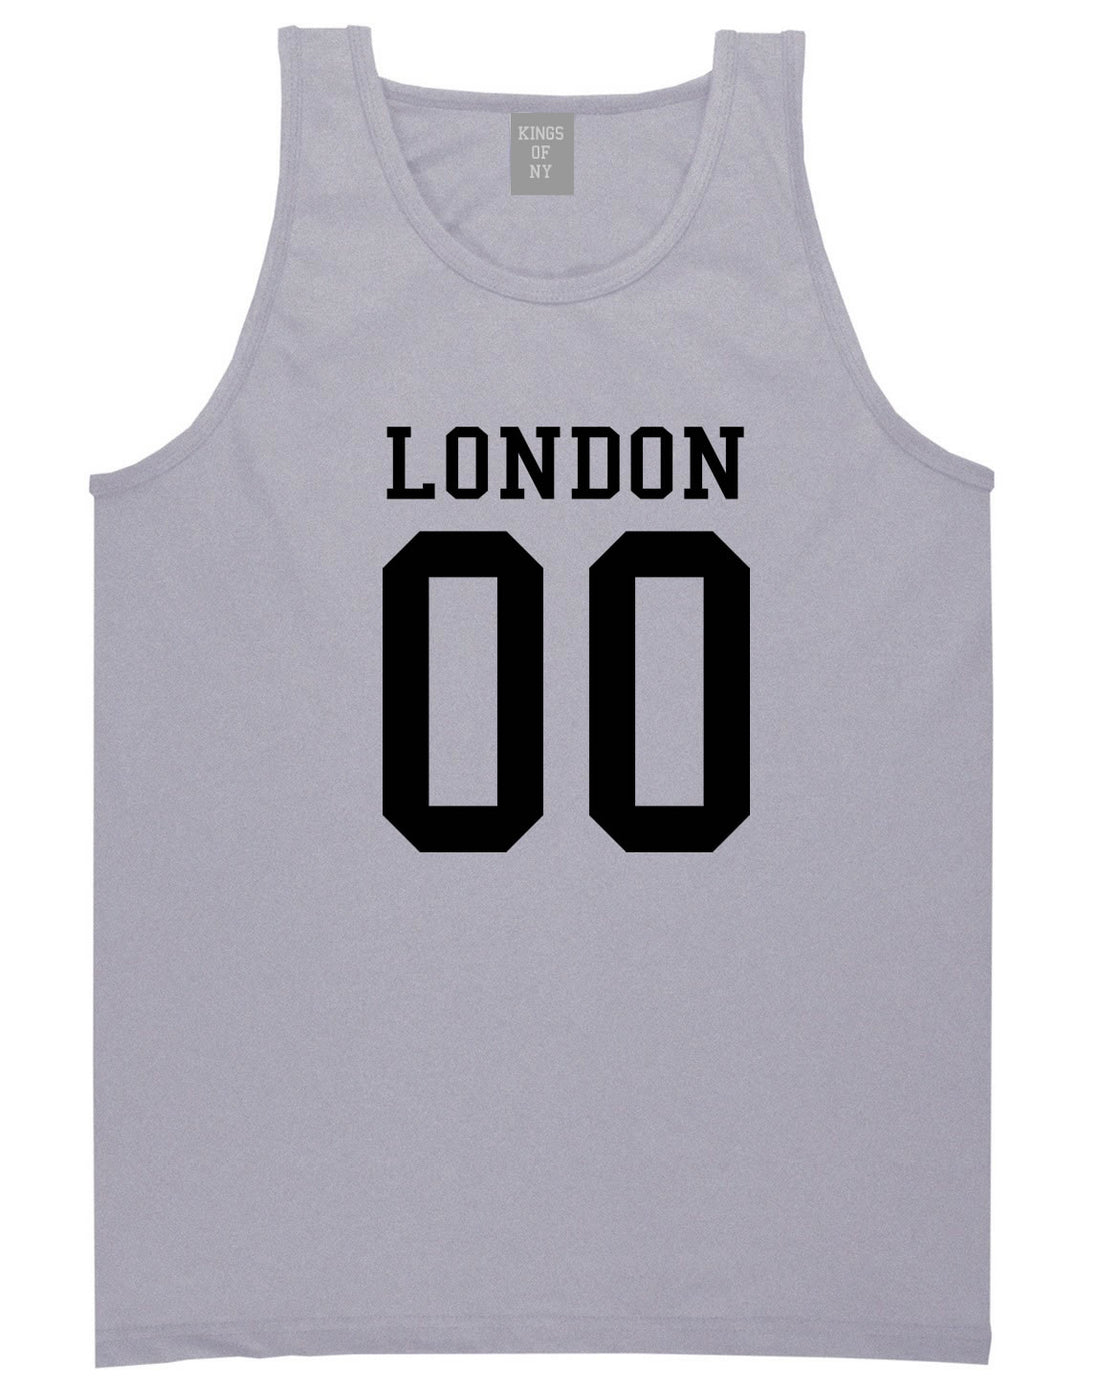 London Team 00 Jersey Tank Top in Grey By Kings Of NY